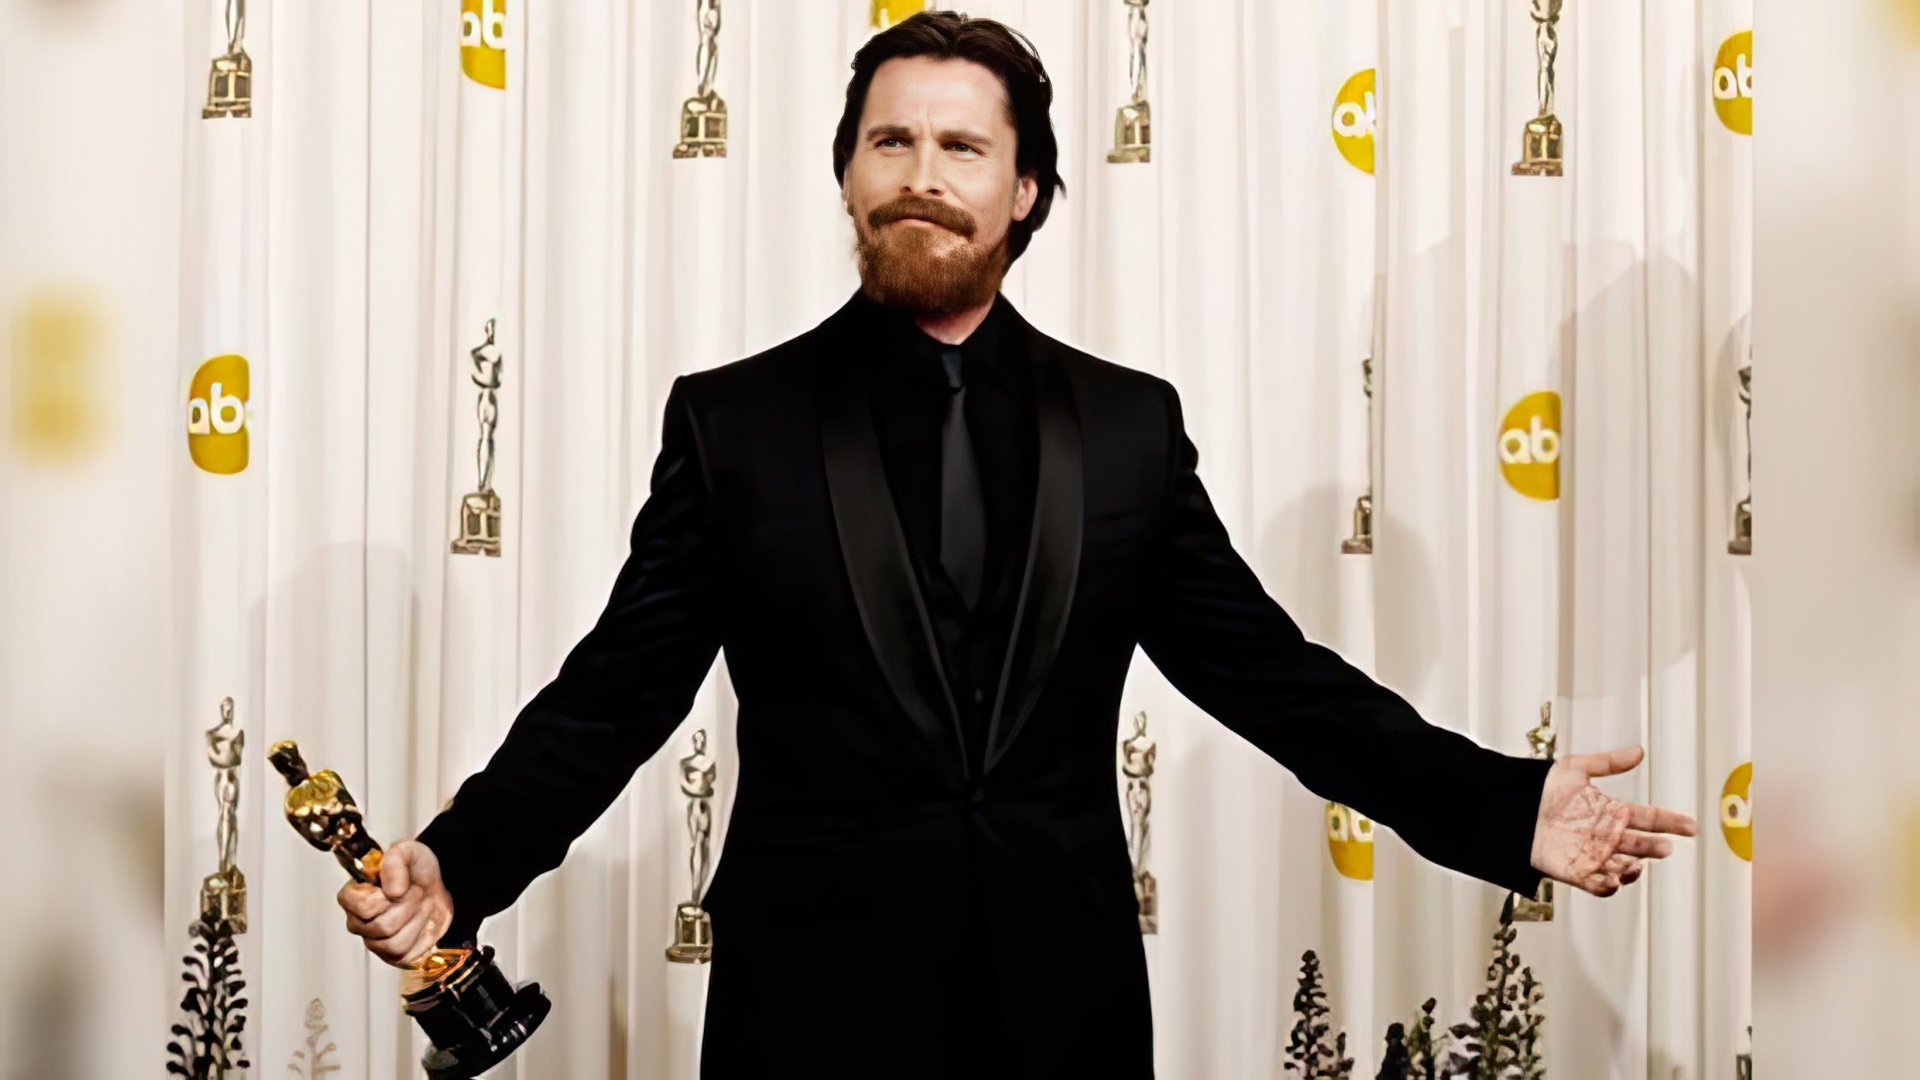 Christian Bale Received the Oscar for the Role of a Former Drug-Addicted Boxer